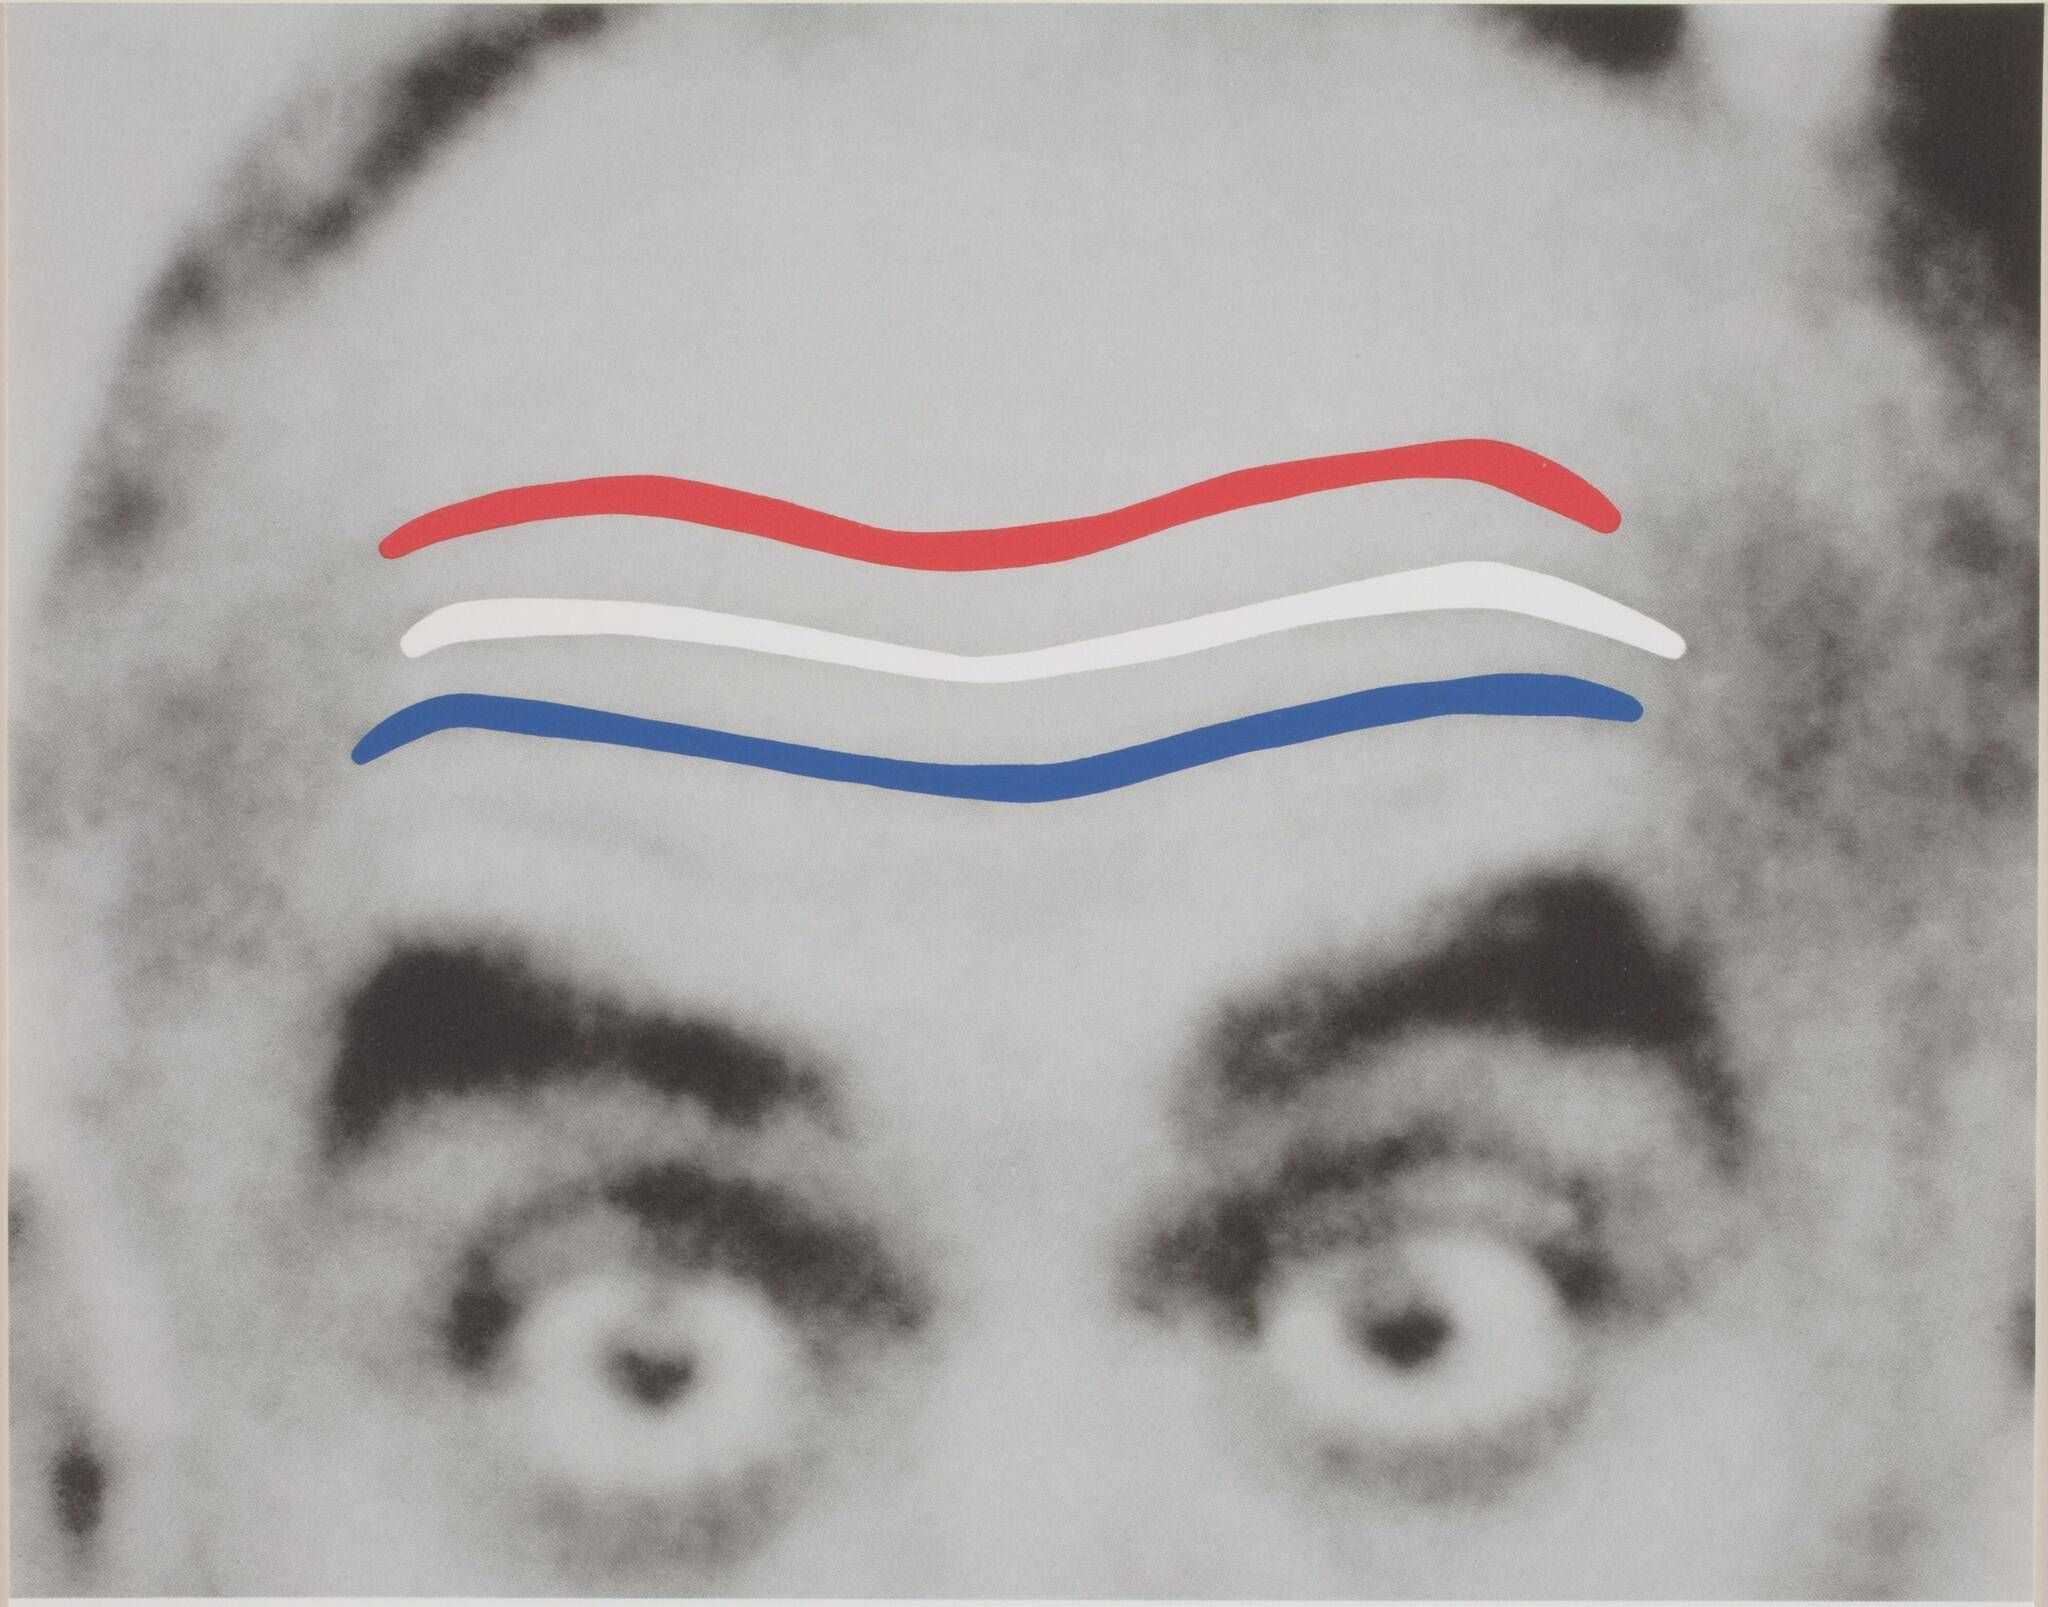 Raised Eyebrows / Furrowed Foreheads (Red, White and Blue)